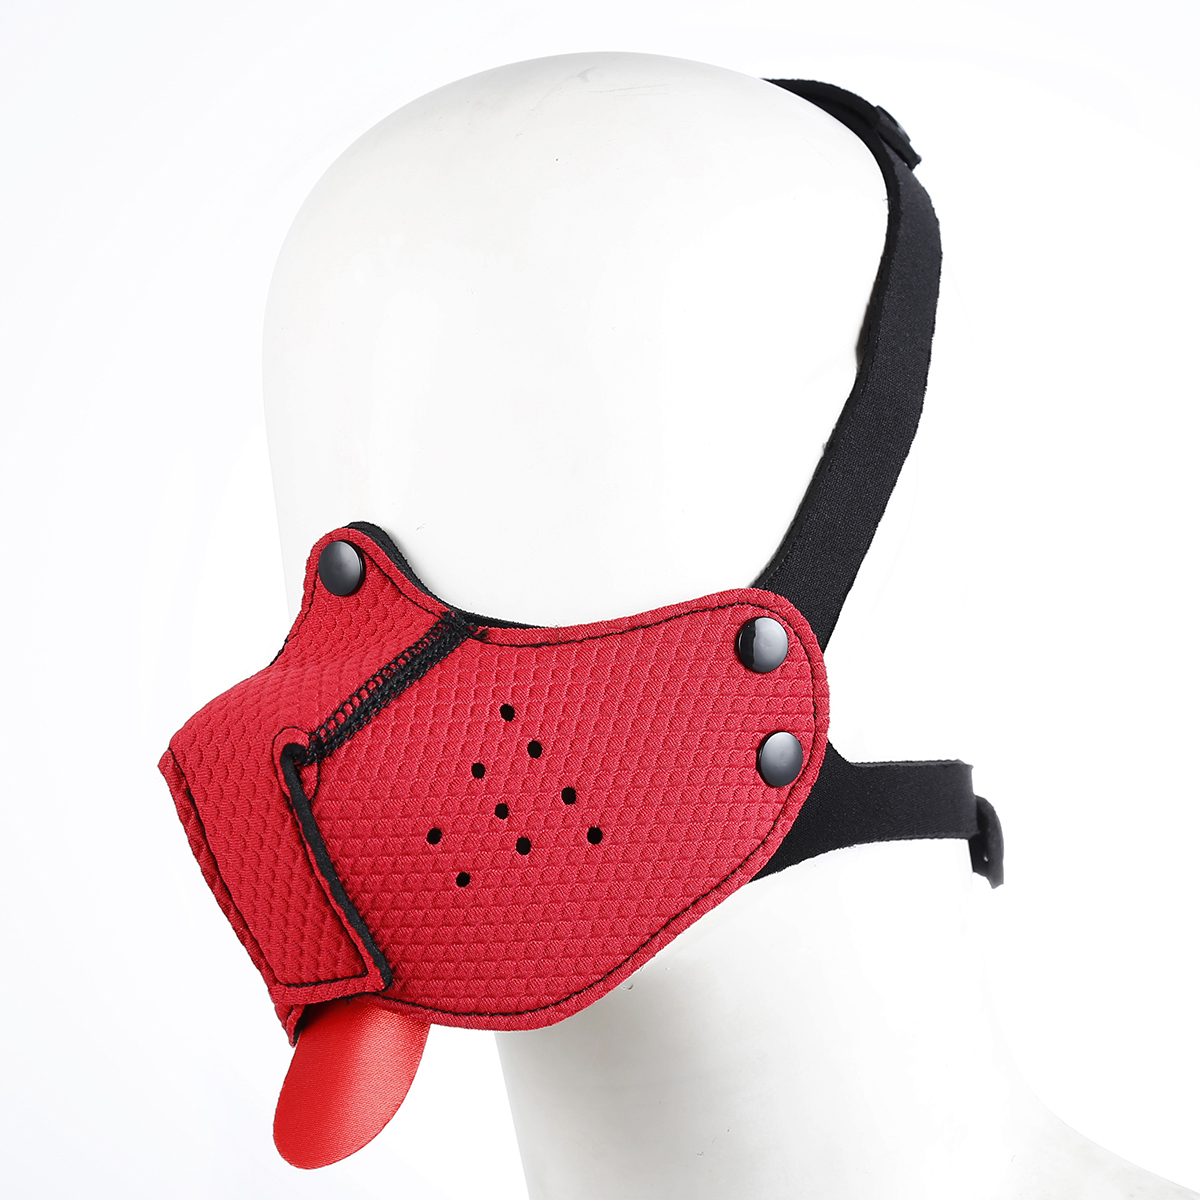 Neoprene-Puppy-Dog-Red-Mouth-Mask-OPR-321074-2